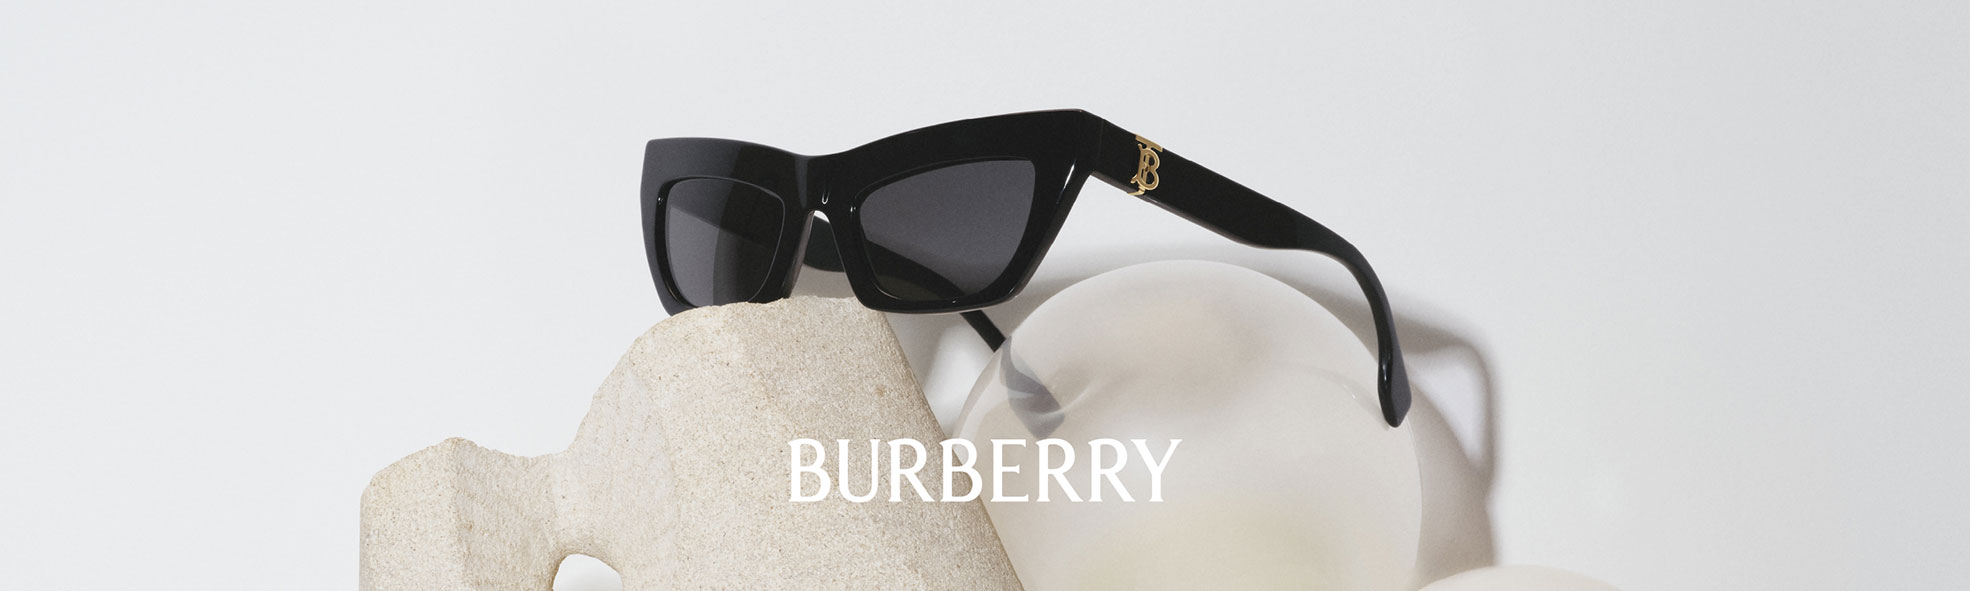 Offers - BURBERRY